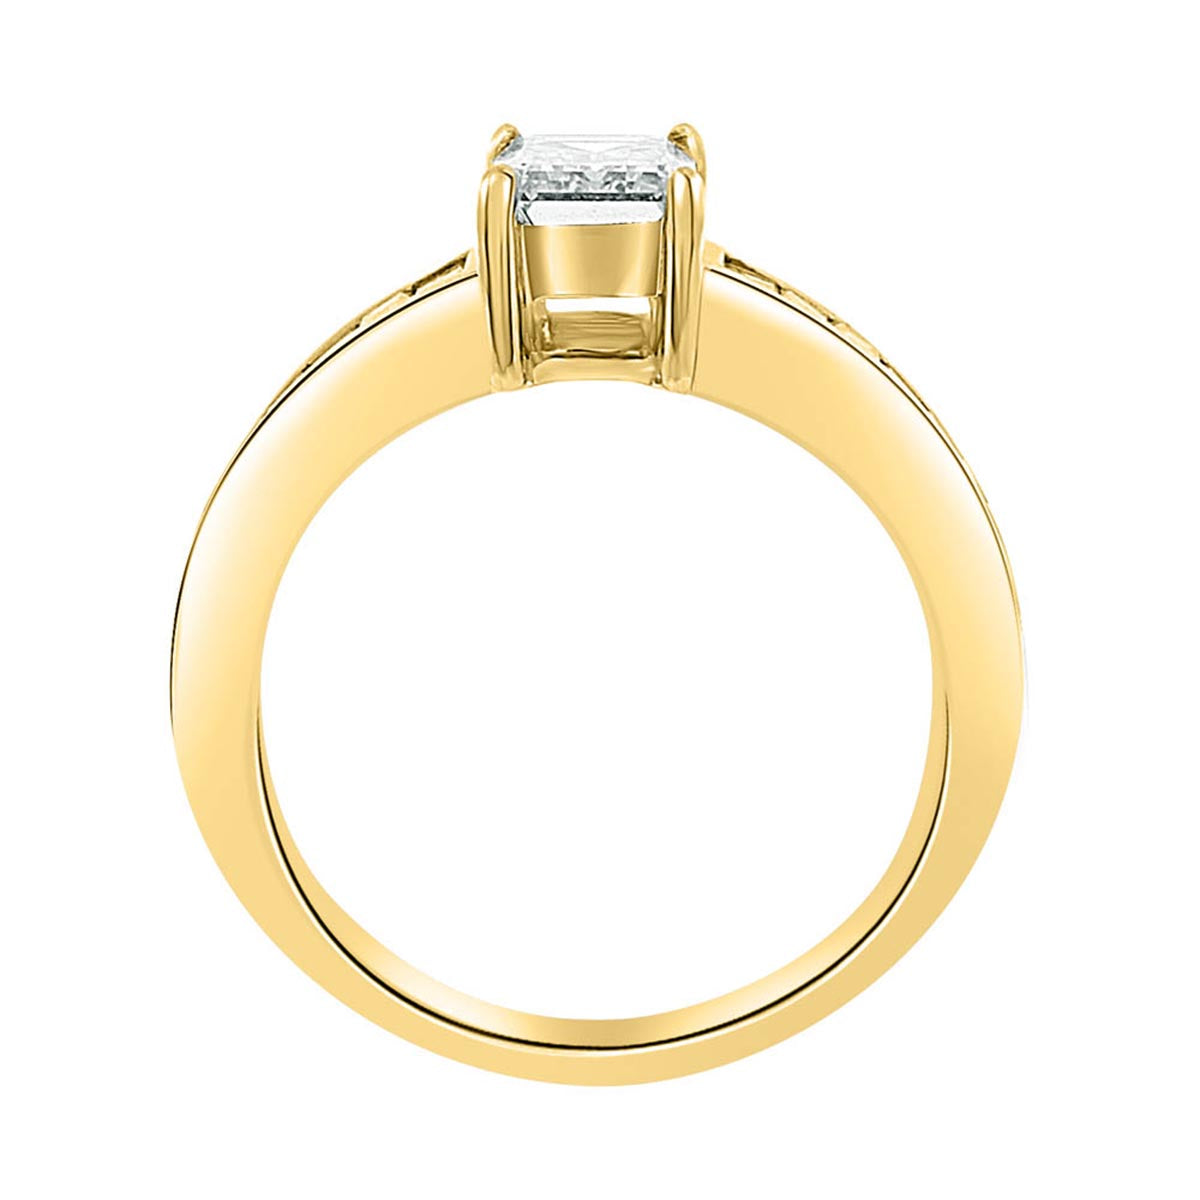 Emerald Cut Engagement Ring made from yellow gold standing upright standing vertical